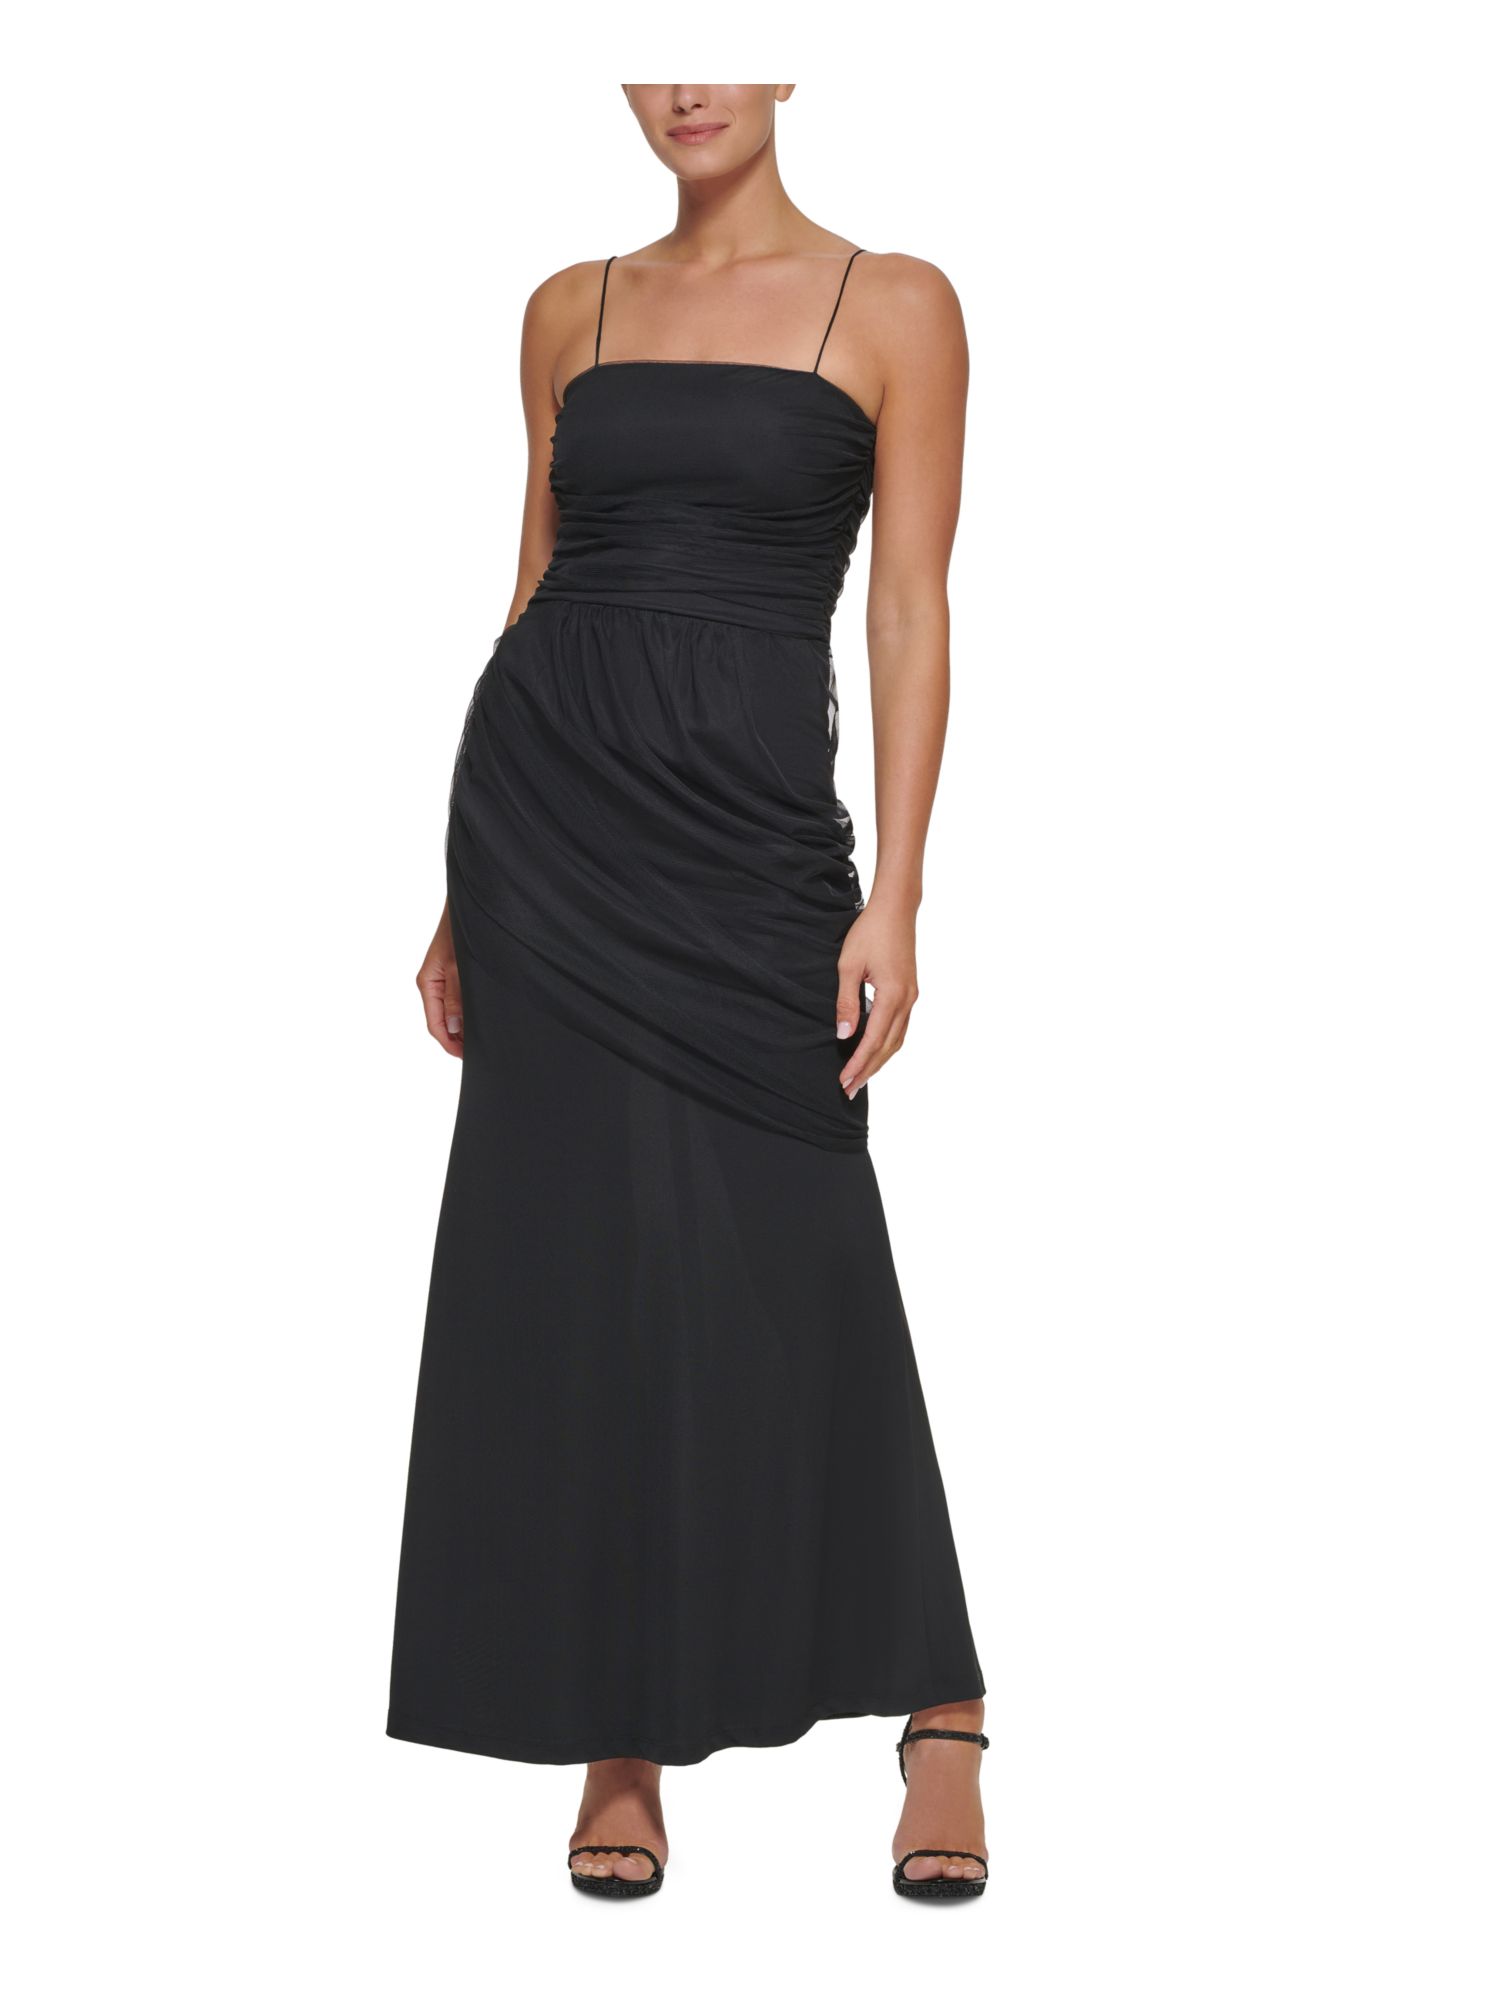 DKNY Womens Black Zippered Slitted Lined Sleeveless Strapless Maxi ...